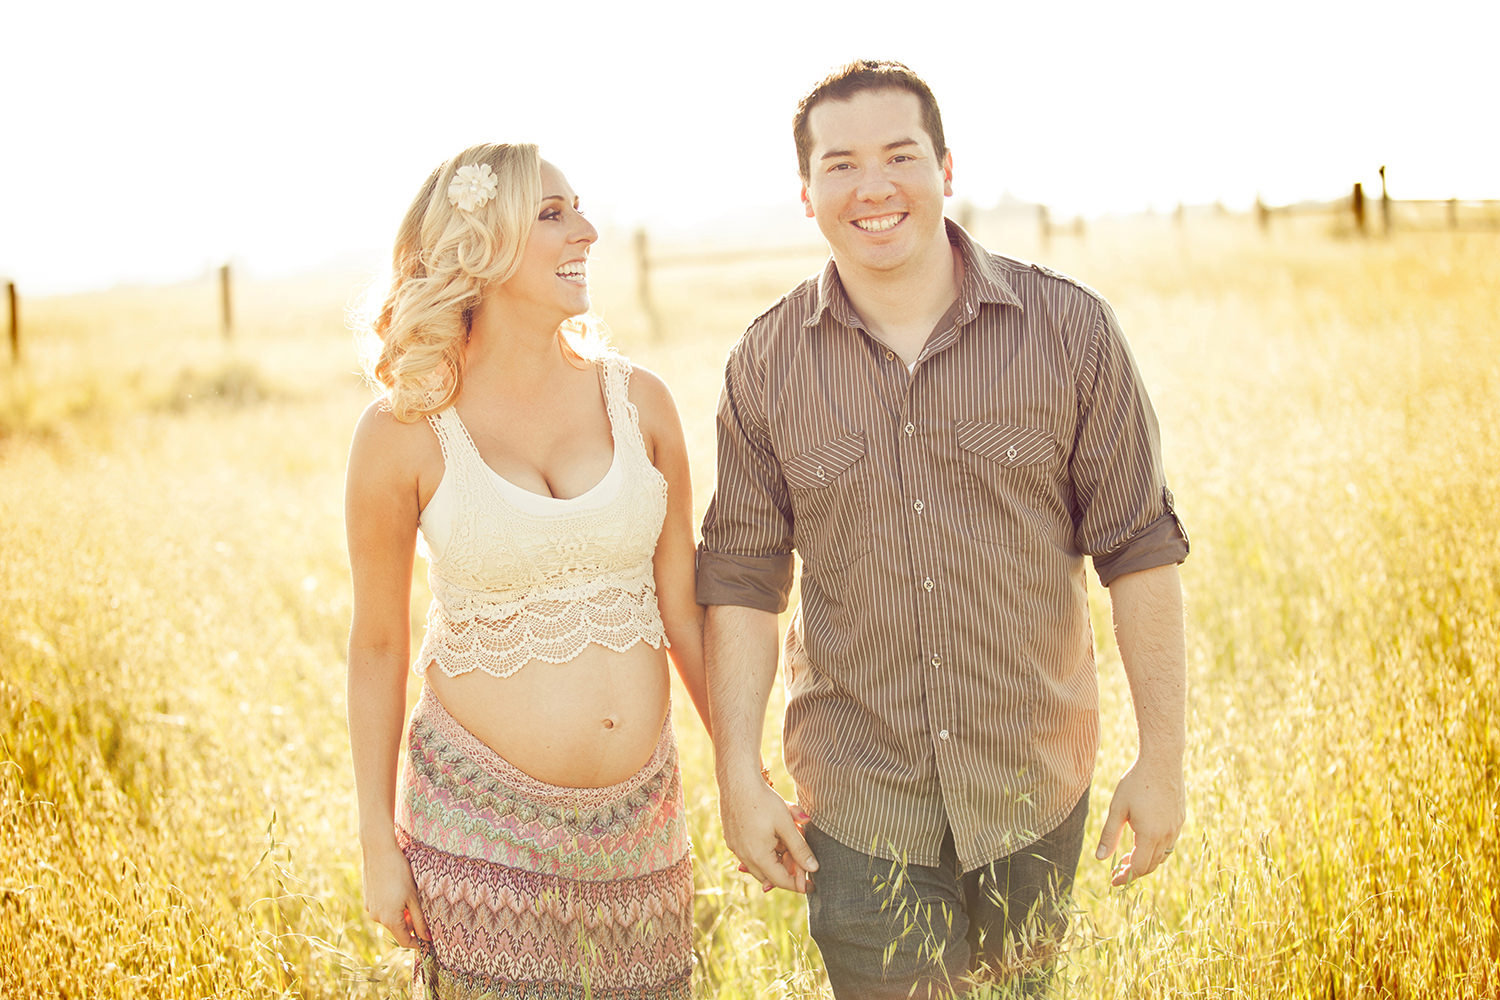 Walking in the field in San Diego for this Maternity Session.